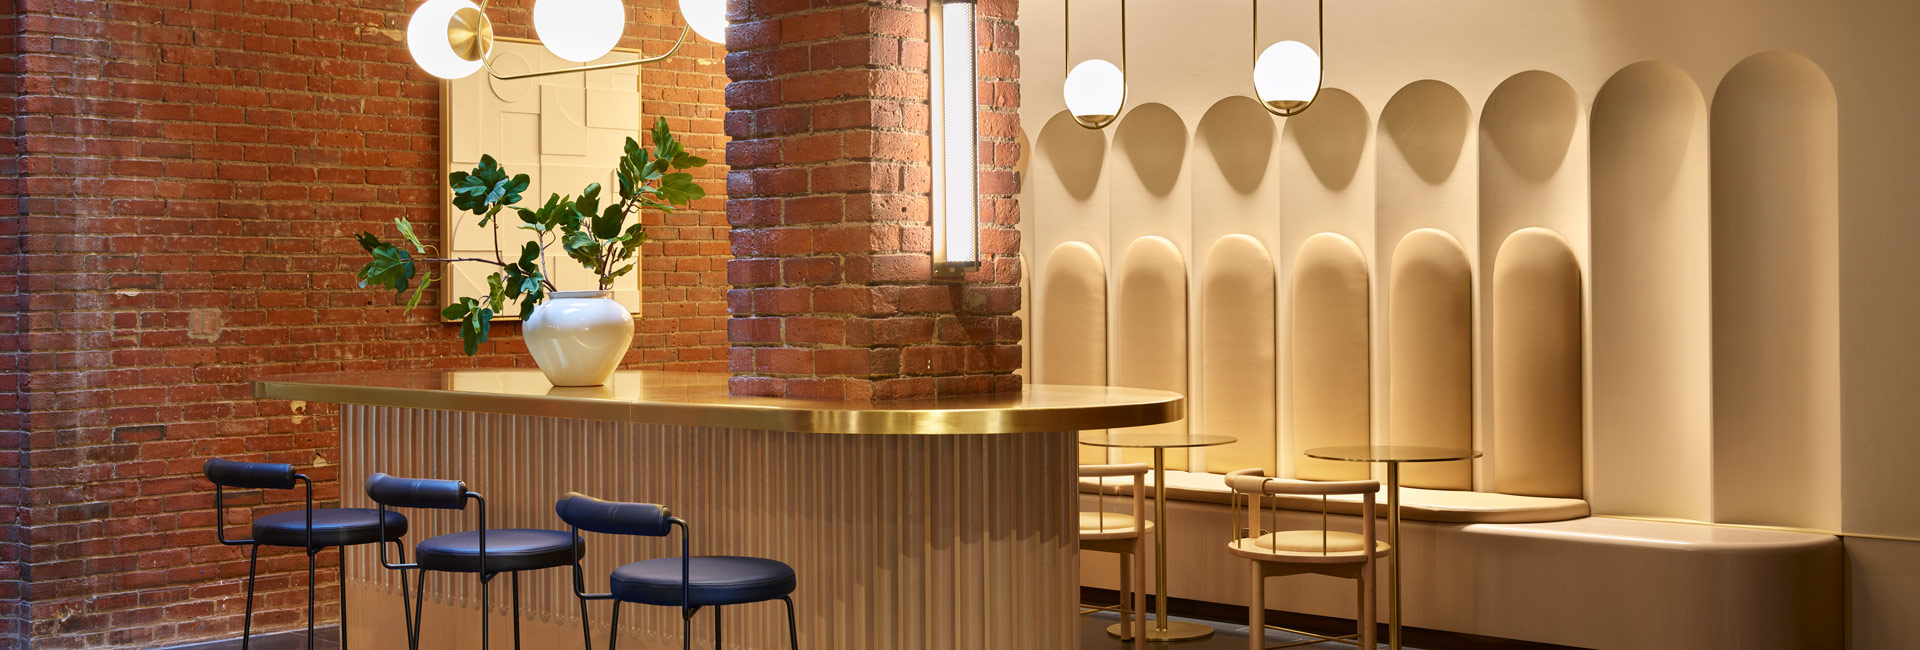 A bar with a gold bar and chairs, creating an elegant and inviting atmosphere for patrons to relax.